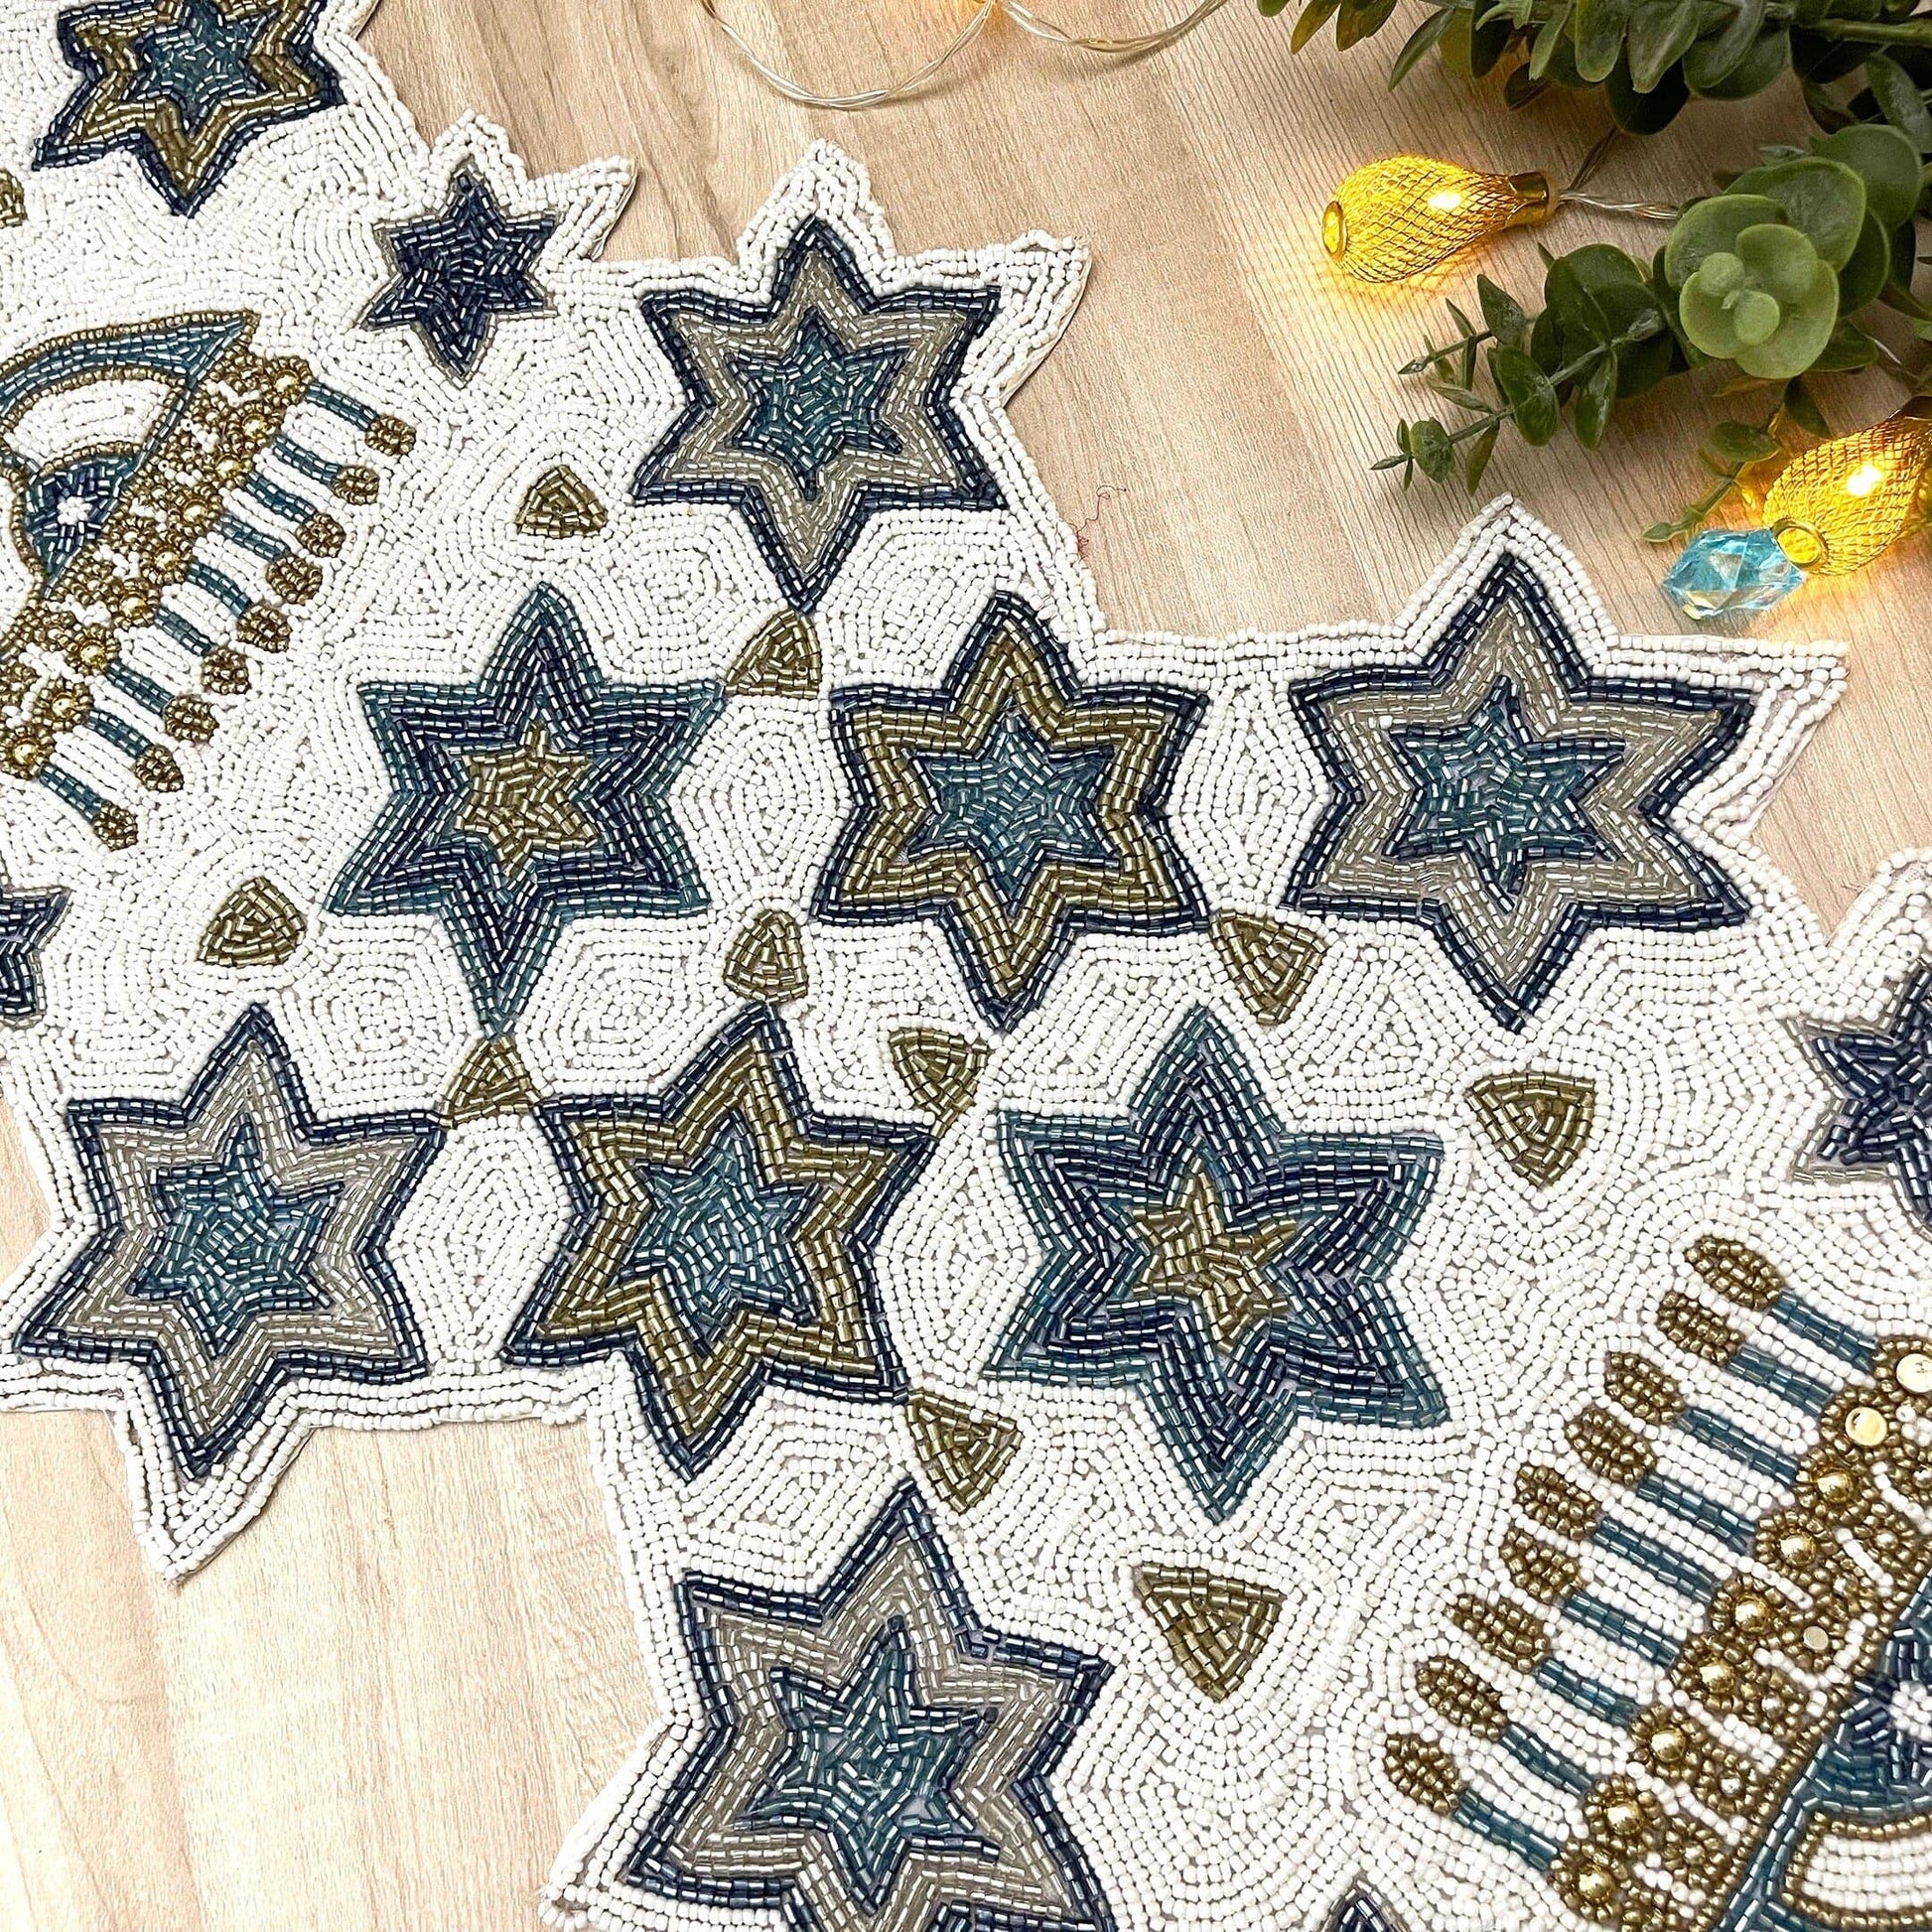 White and Blue Hanukkah Decorative Beaded Table Runner - MAIA HOMES